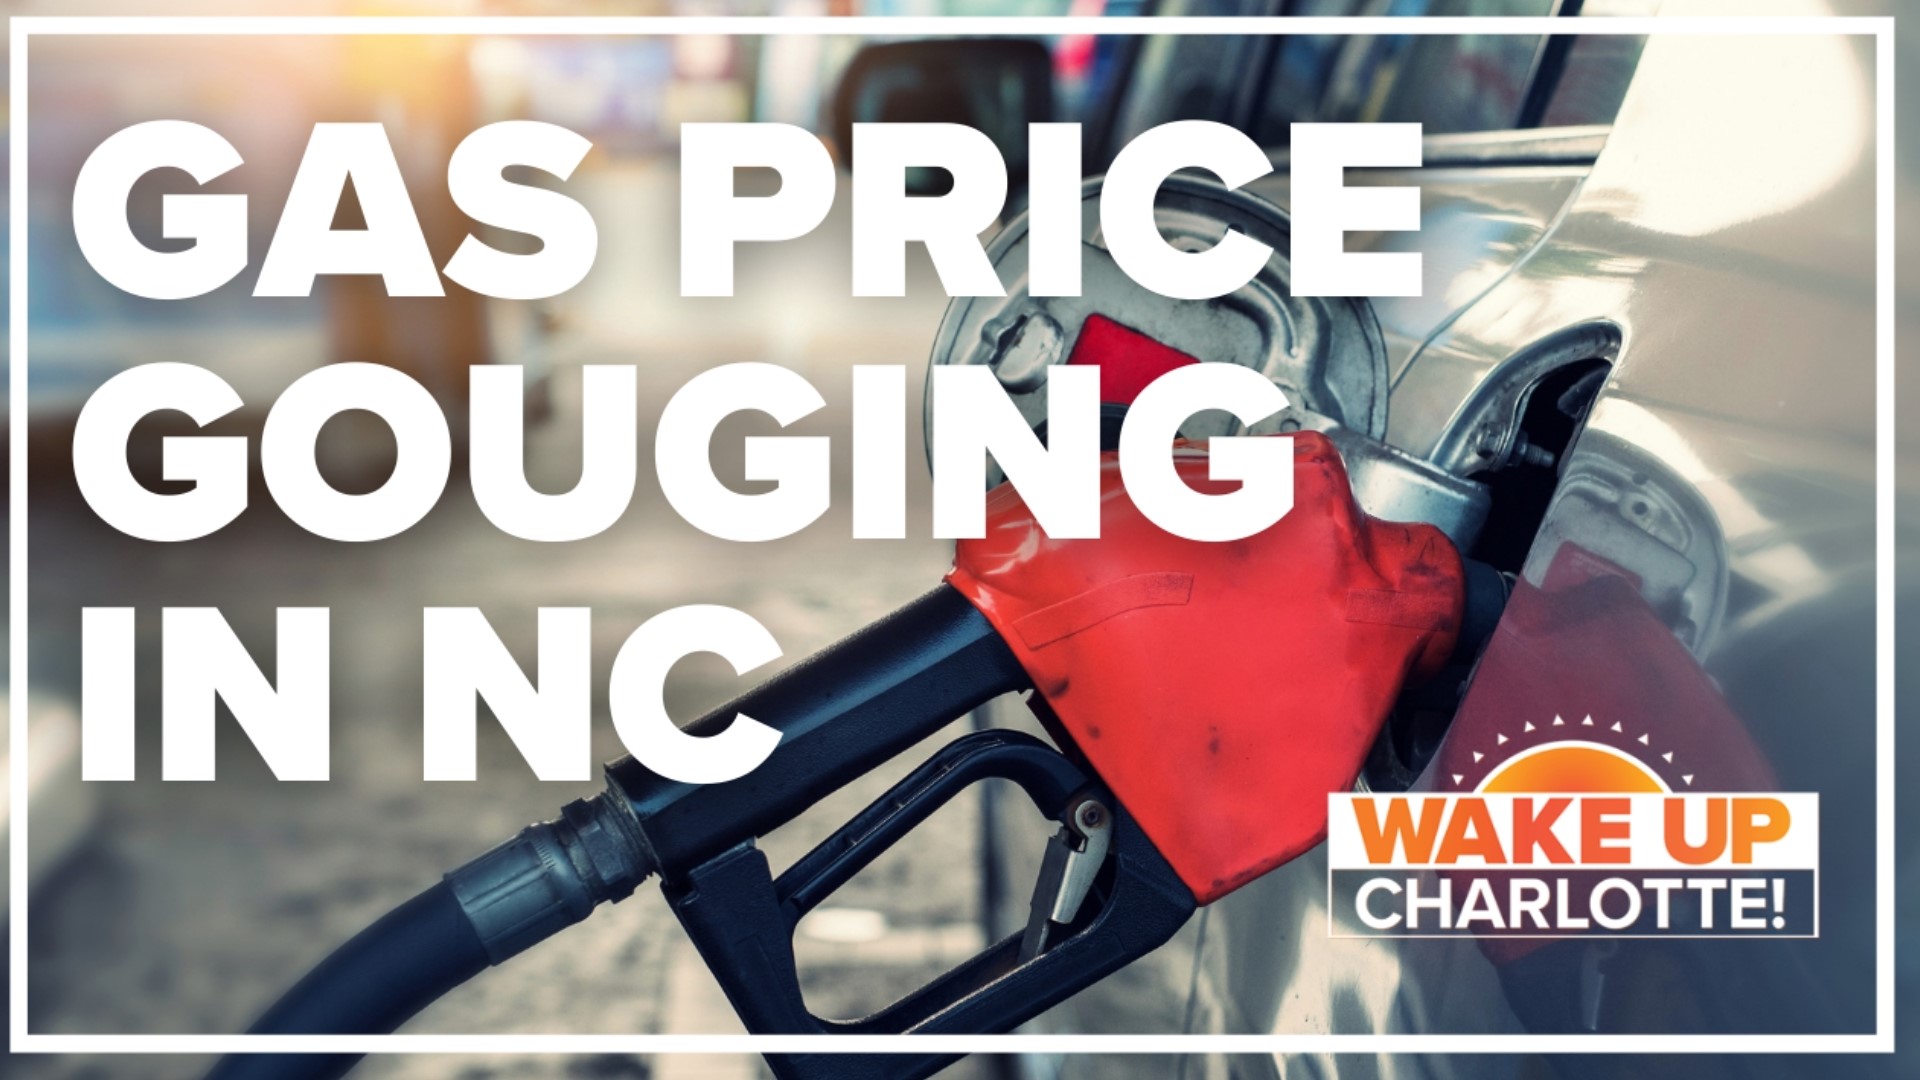 Over the last month, many people on social media claim gas stations are raising their prices too high.
Some people are even accusing gas stations of price gouging.